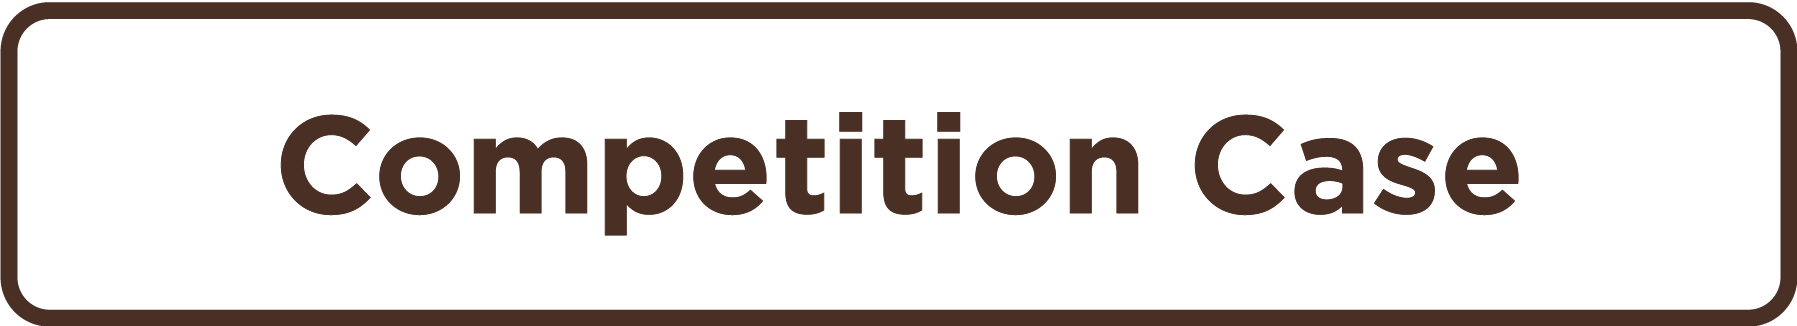 compeittion-case-white-52.png